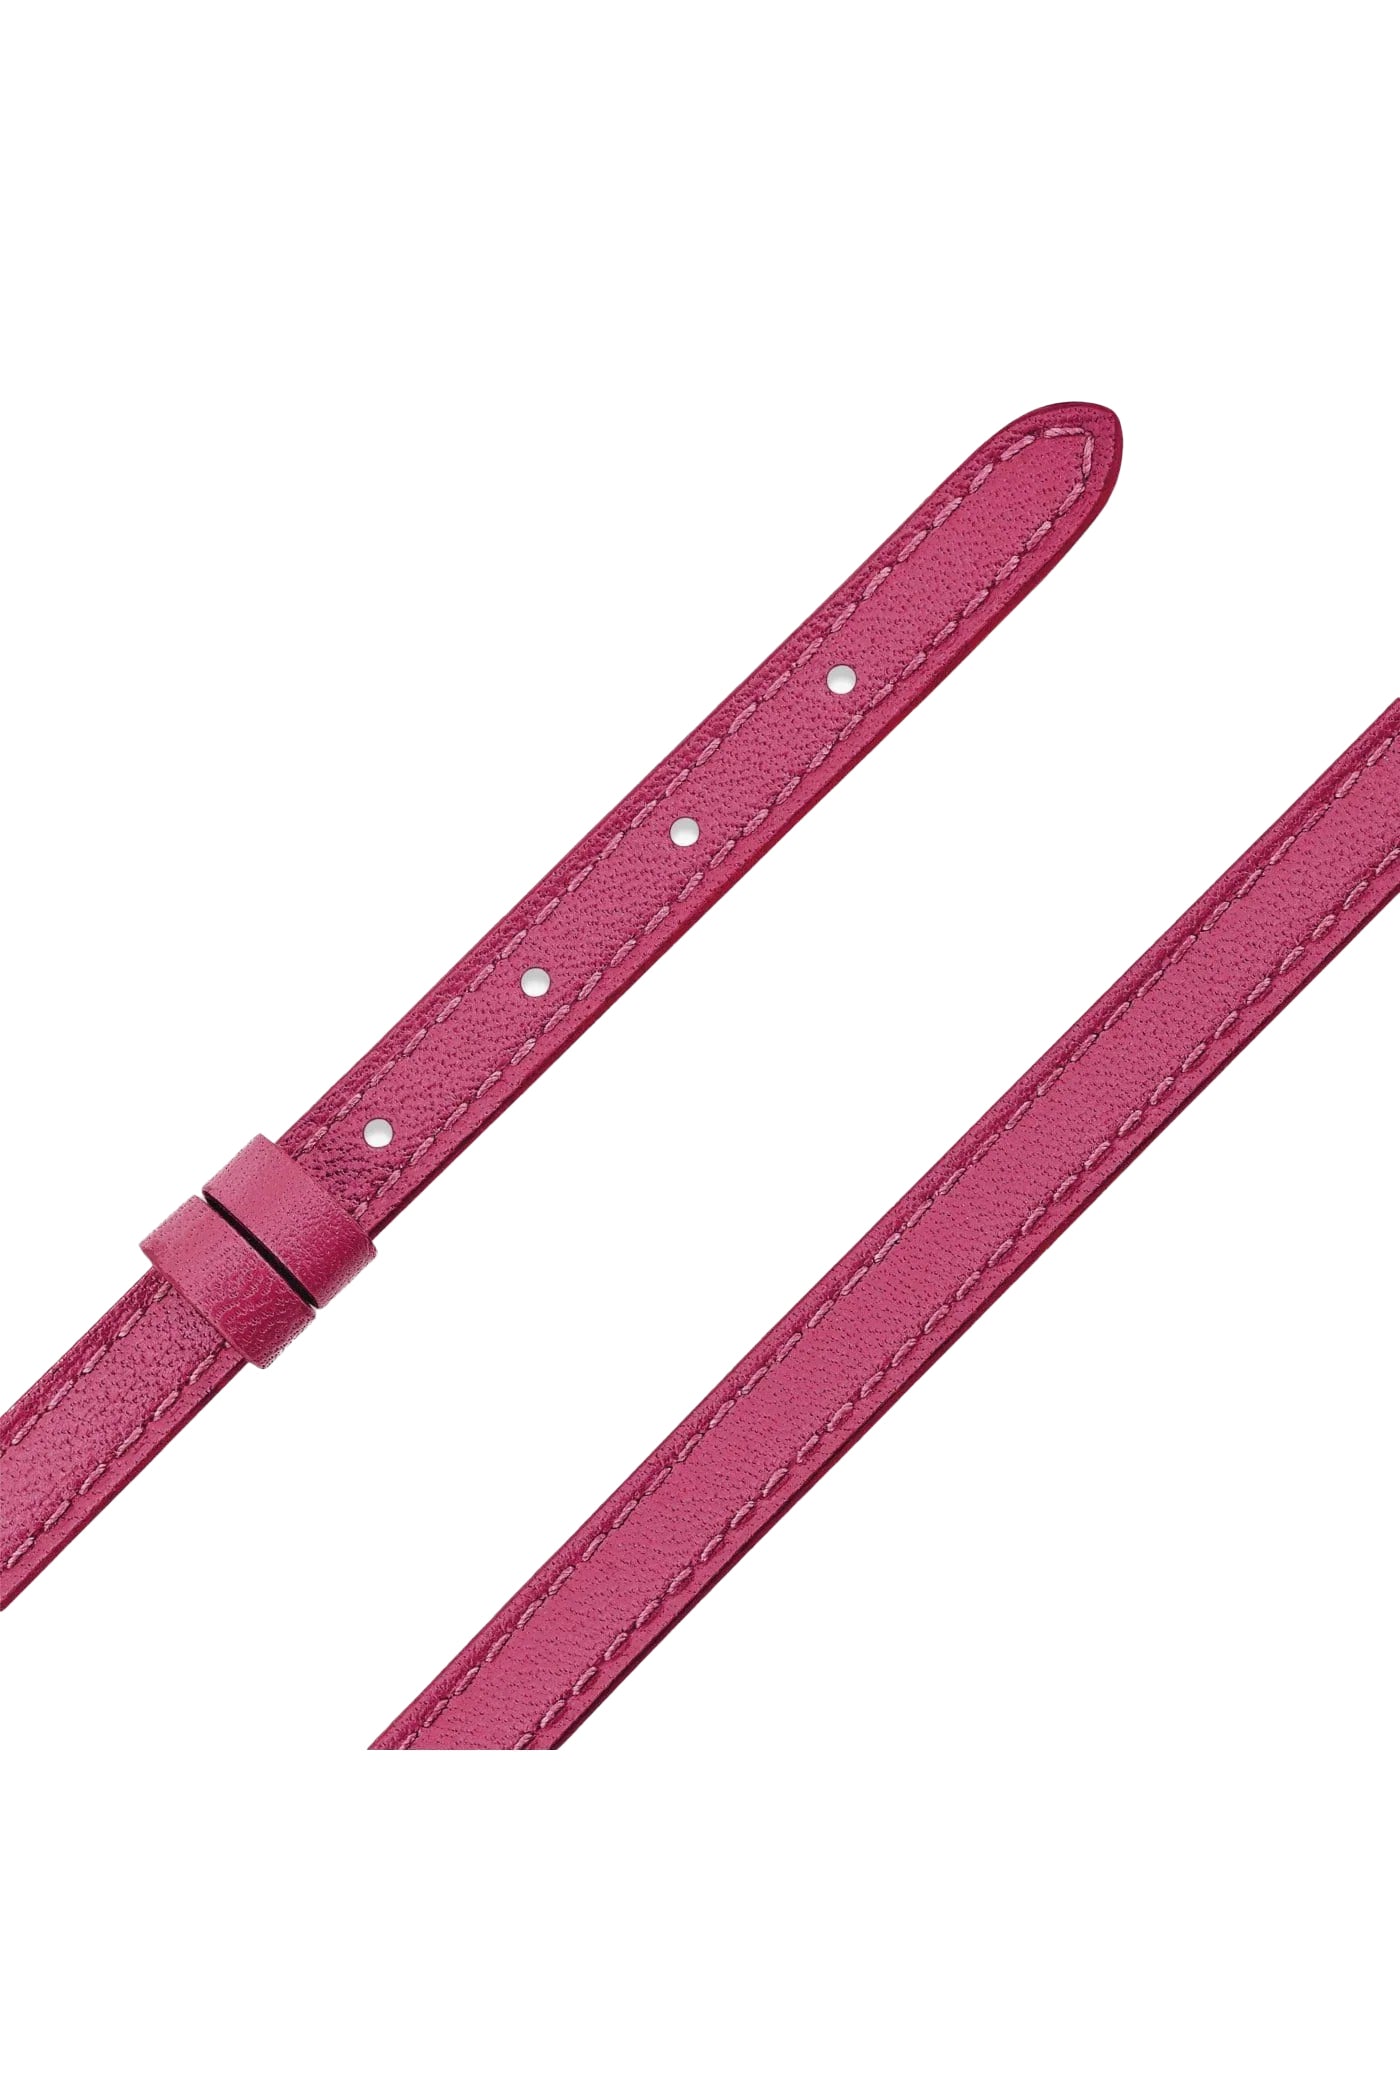 MESSIKA-My Move Leather Bracelet - Raspberry Pink-PINK